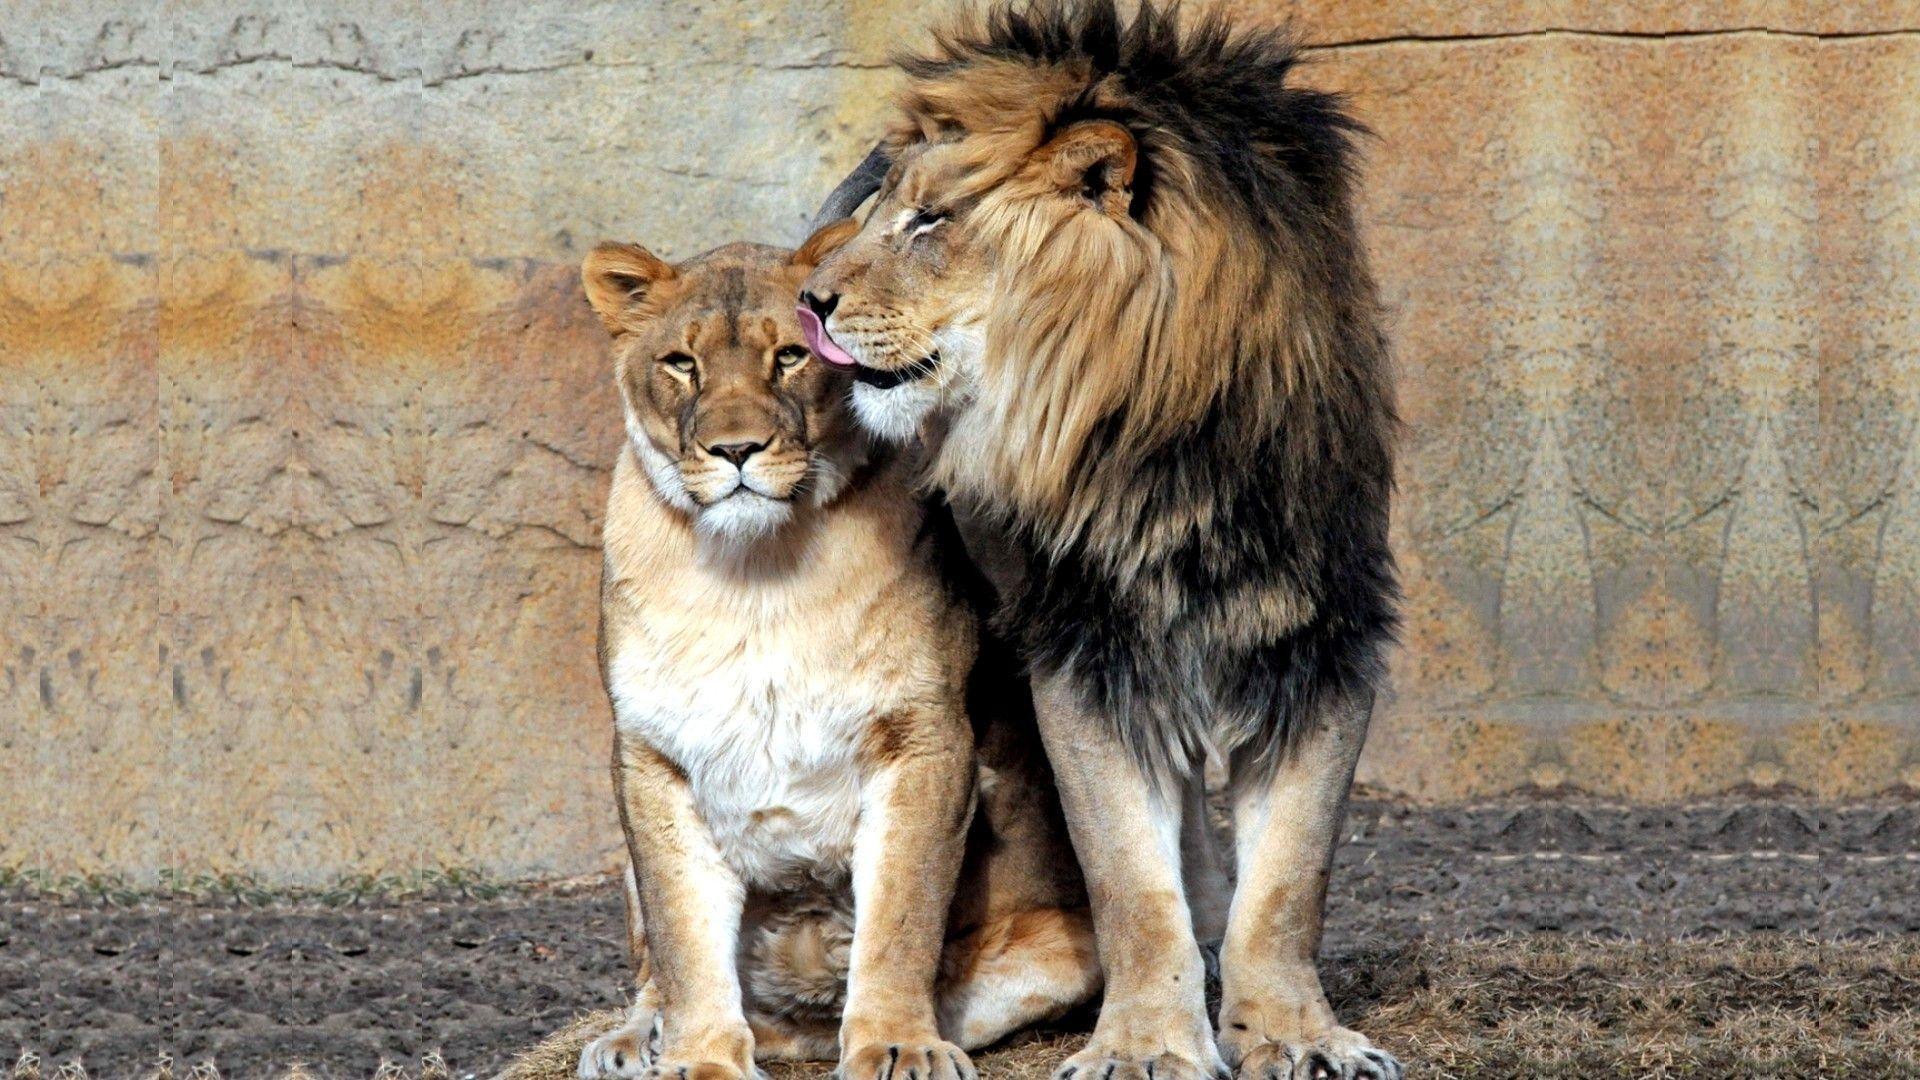 ScreenHeaven: Jungle sweethearts lioness queen couple king lion